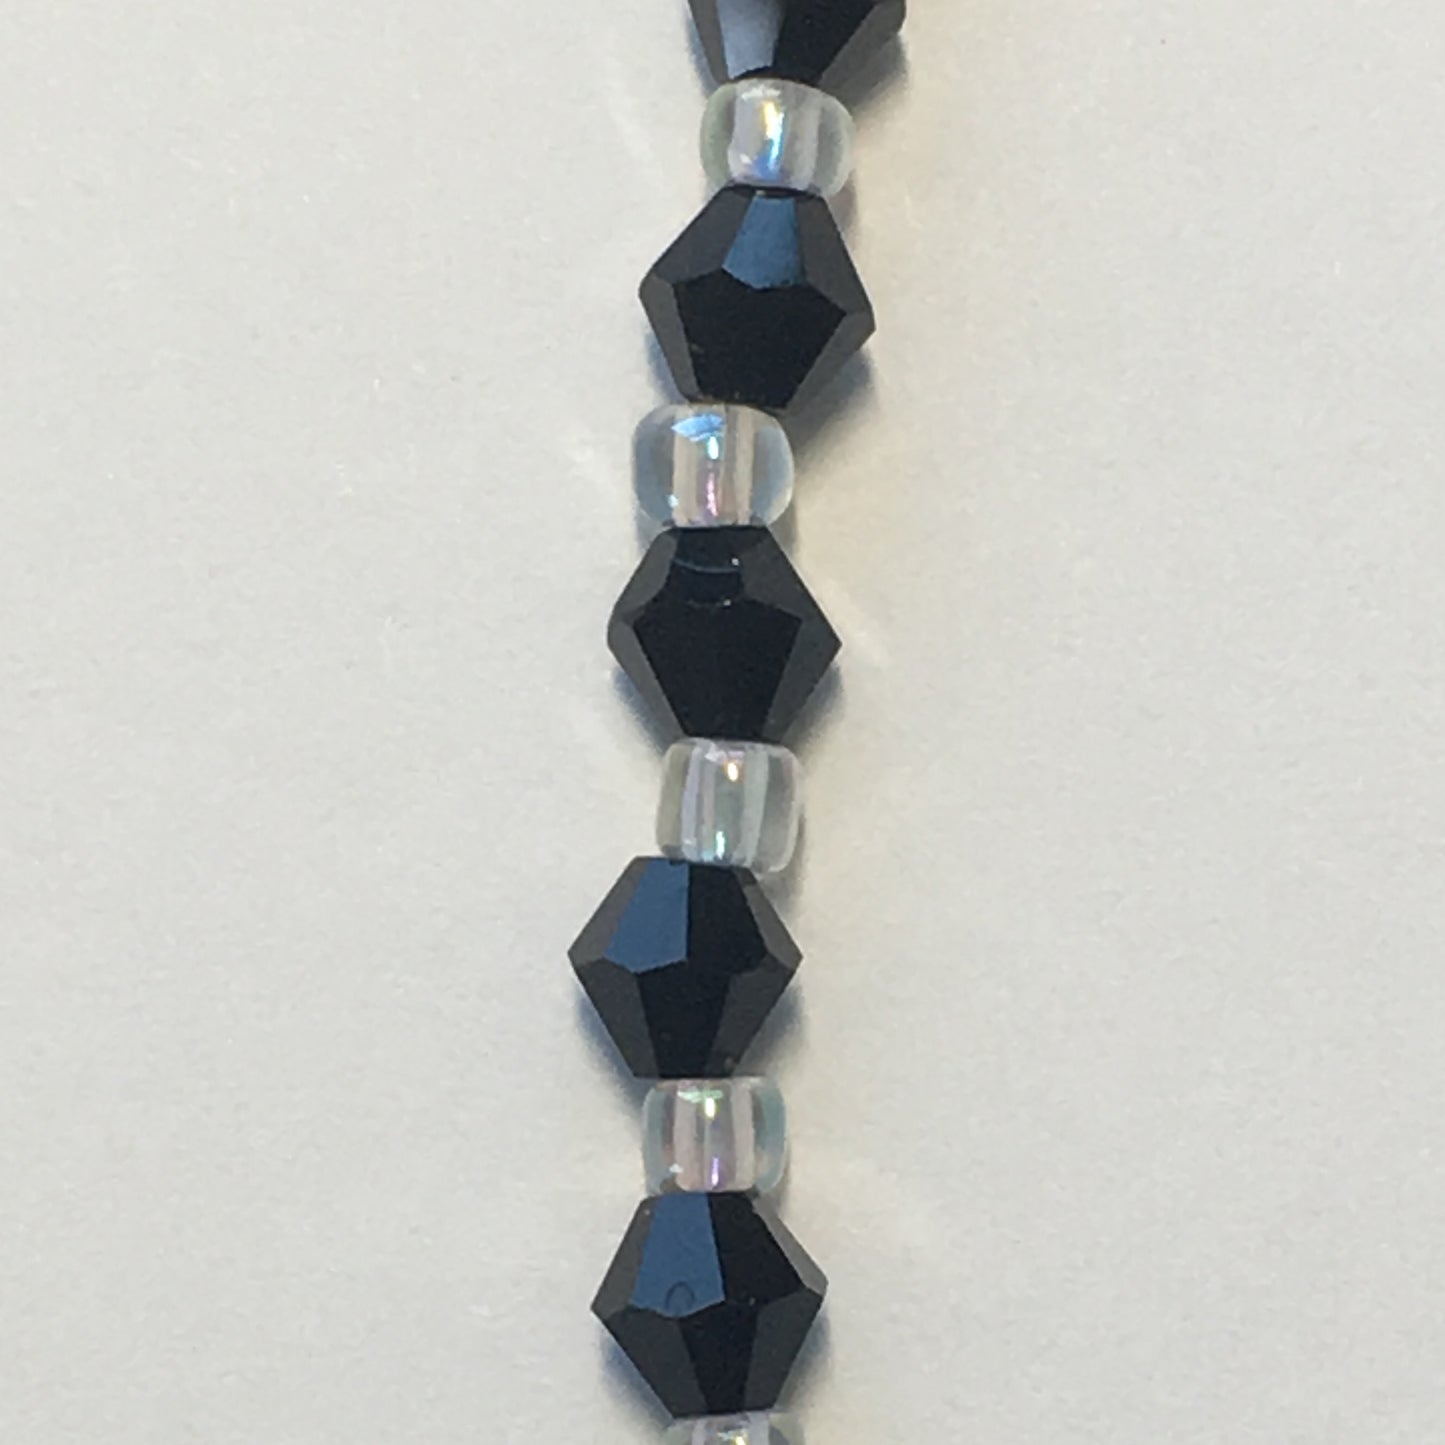 Bead Gallery Jet Black Bicone Glass Beads, 4 mm / 8-Inch- 33 Beads